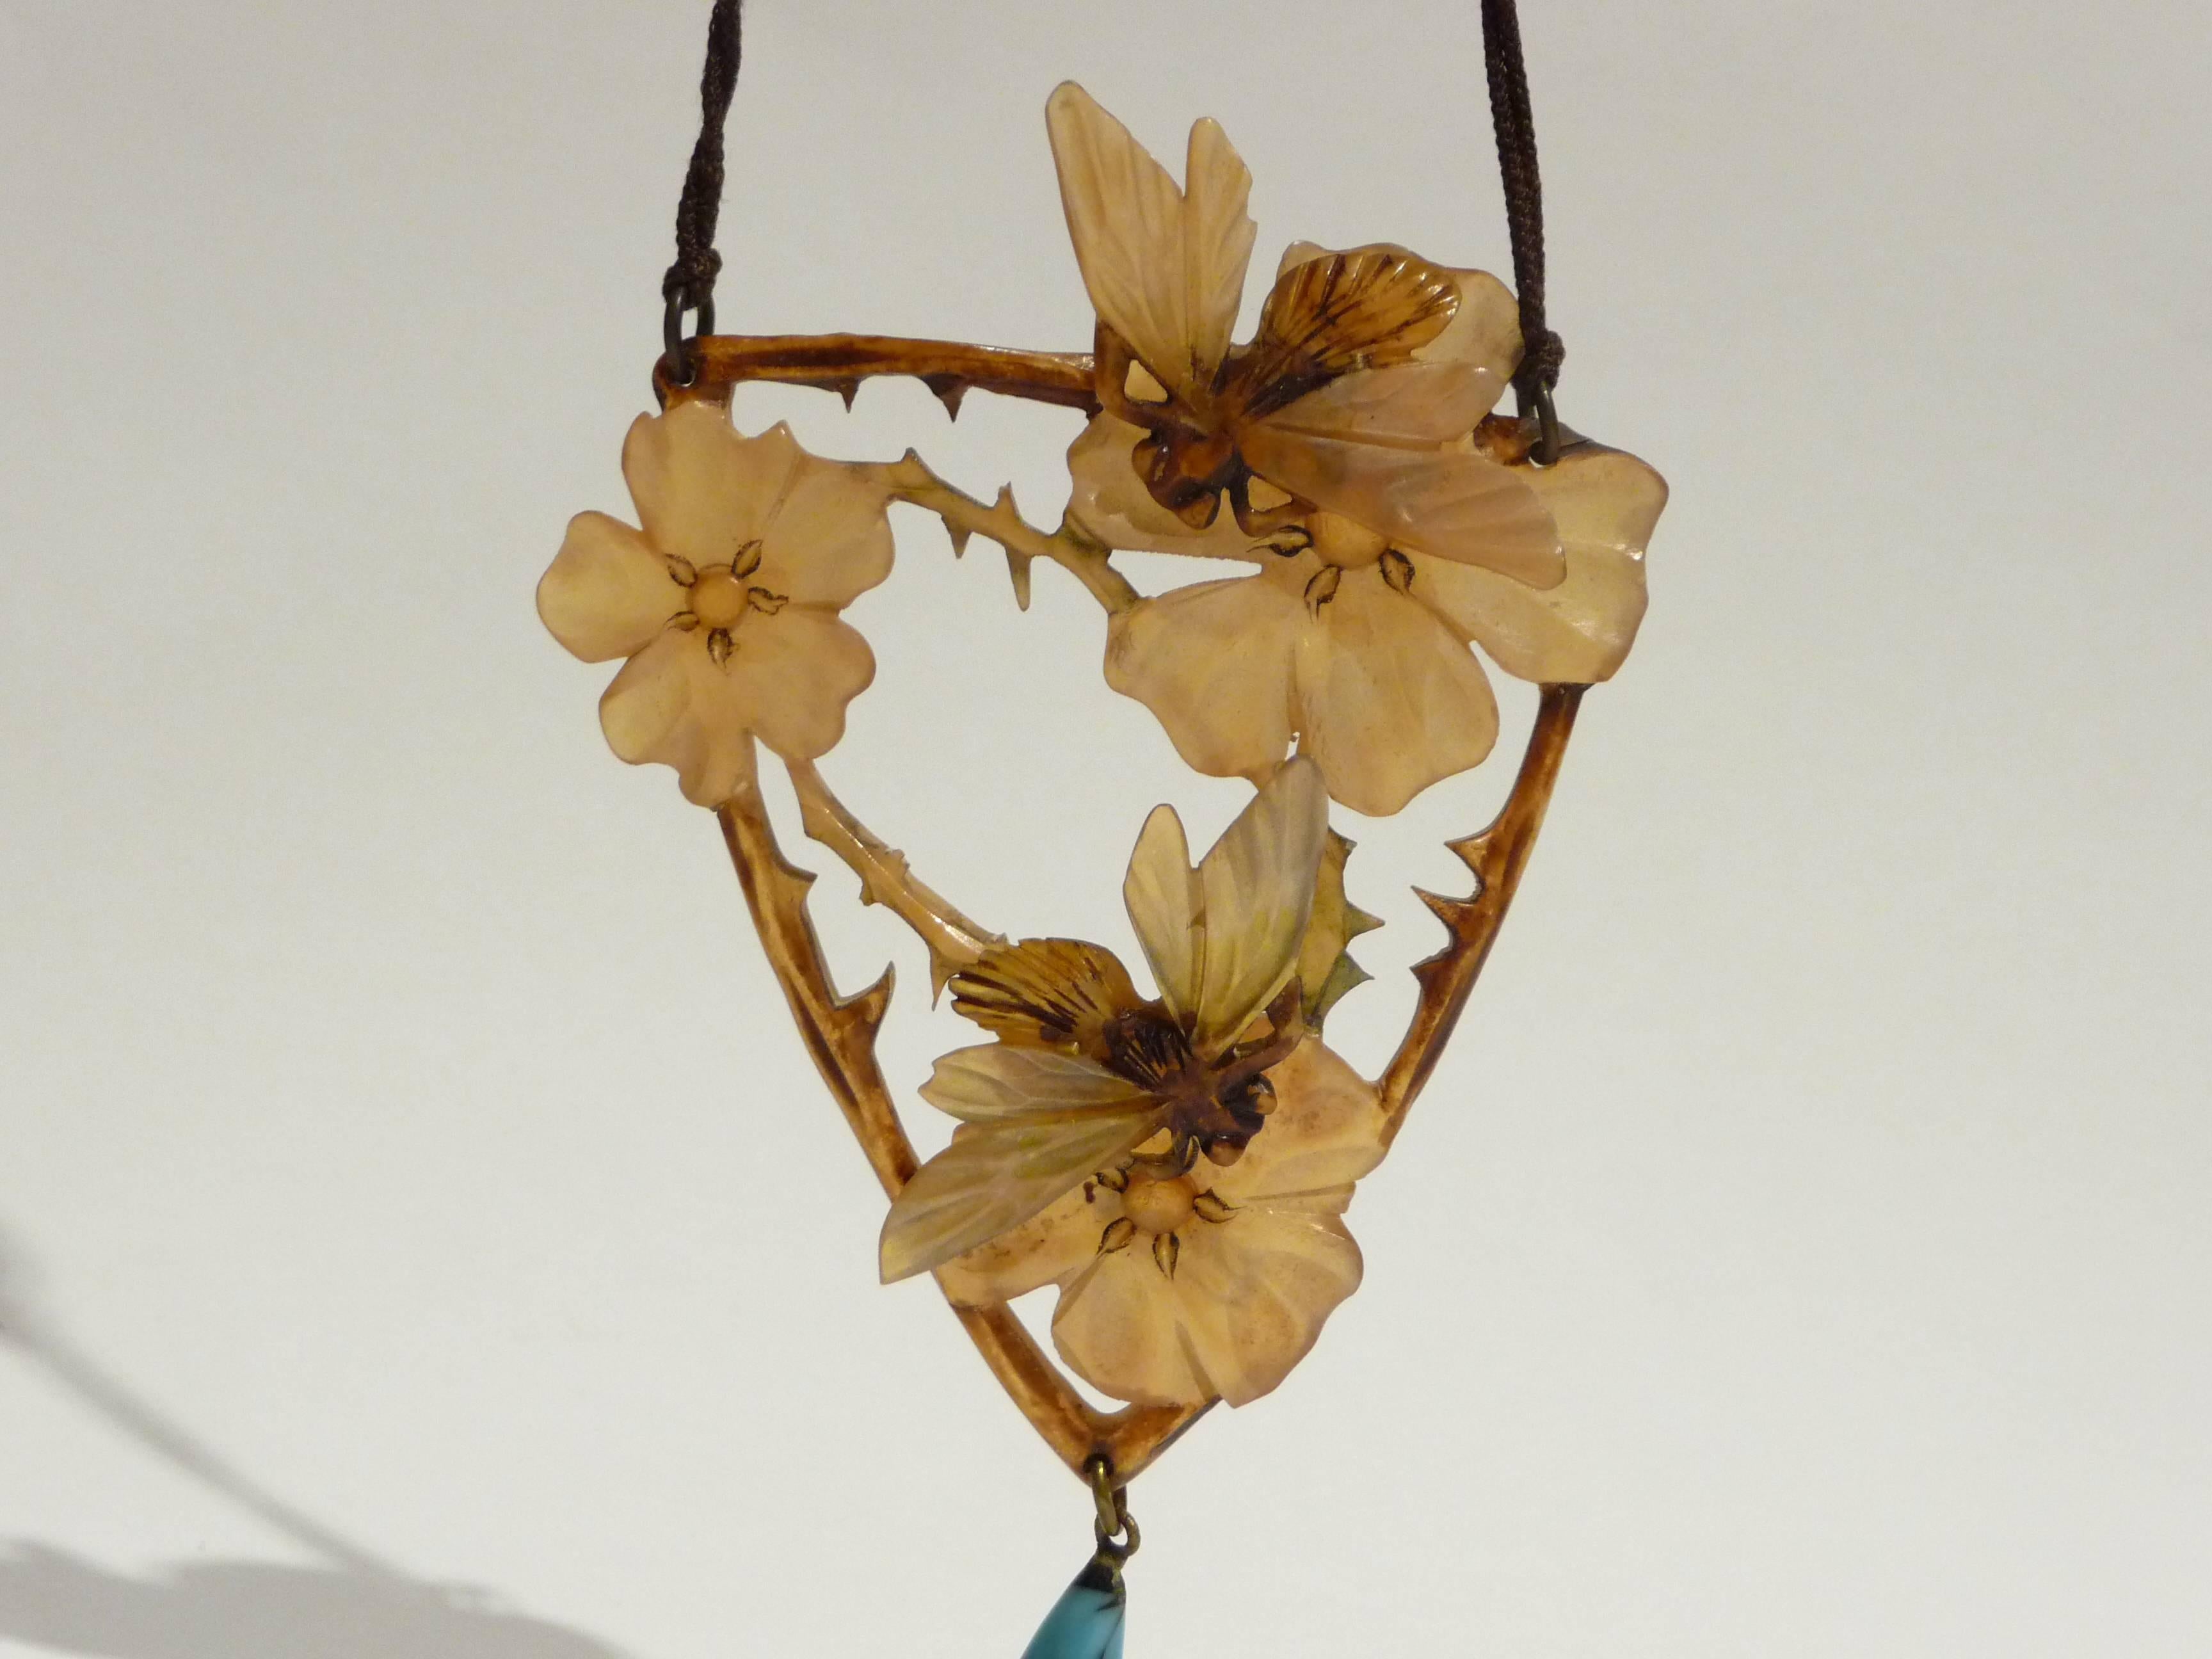 Elisabeth Bonté.
A sculpted and patinated Horn and glass beads pendant. 
Signed.
Fitted box.
Total height: 48 cm.